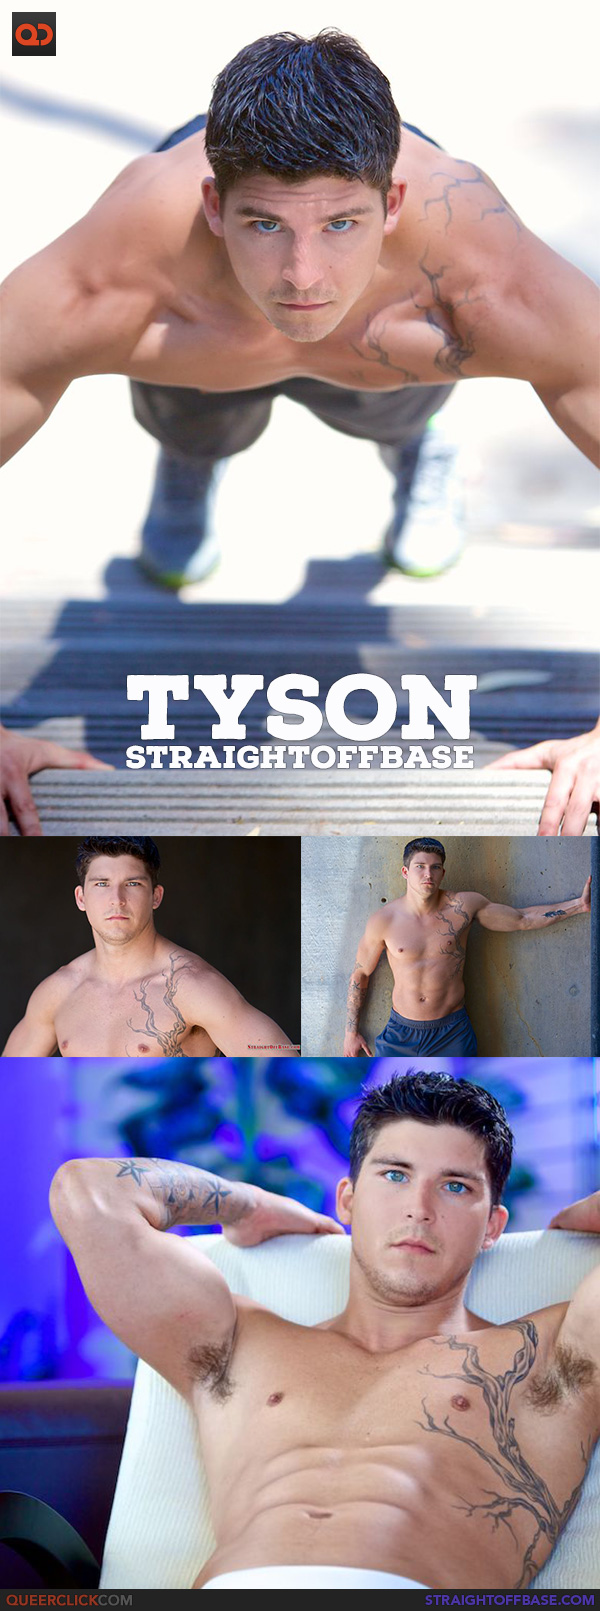 Straight Off Base: Navy Petty Officer 2nd Class Tyson